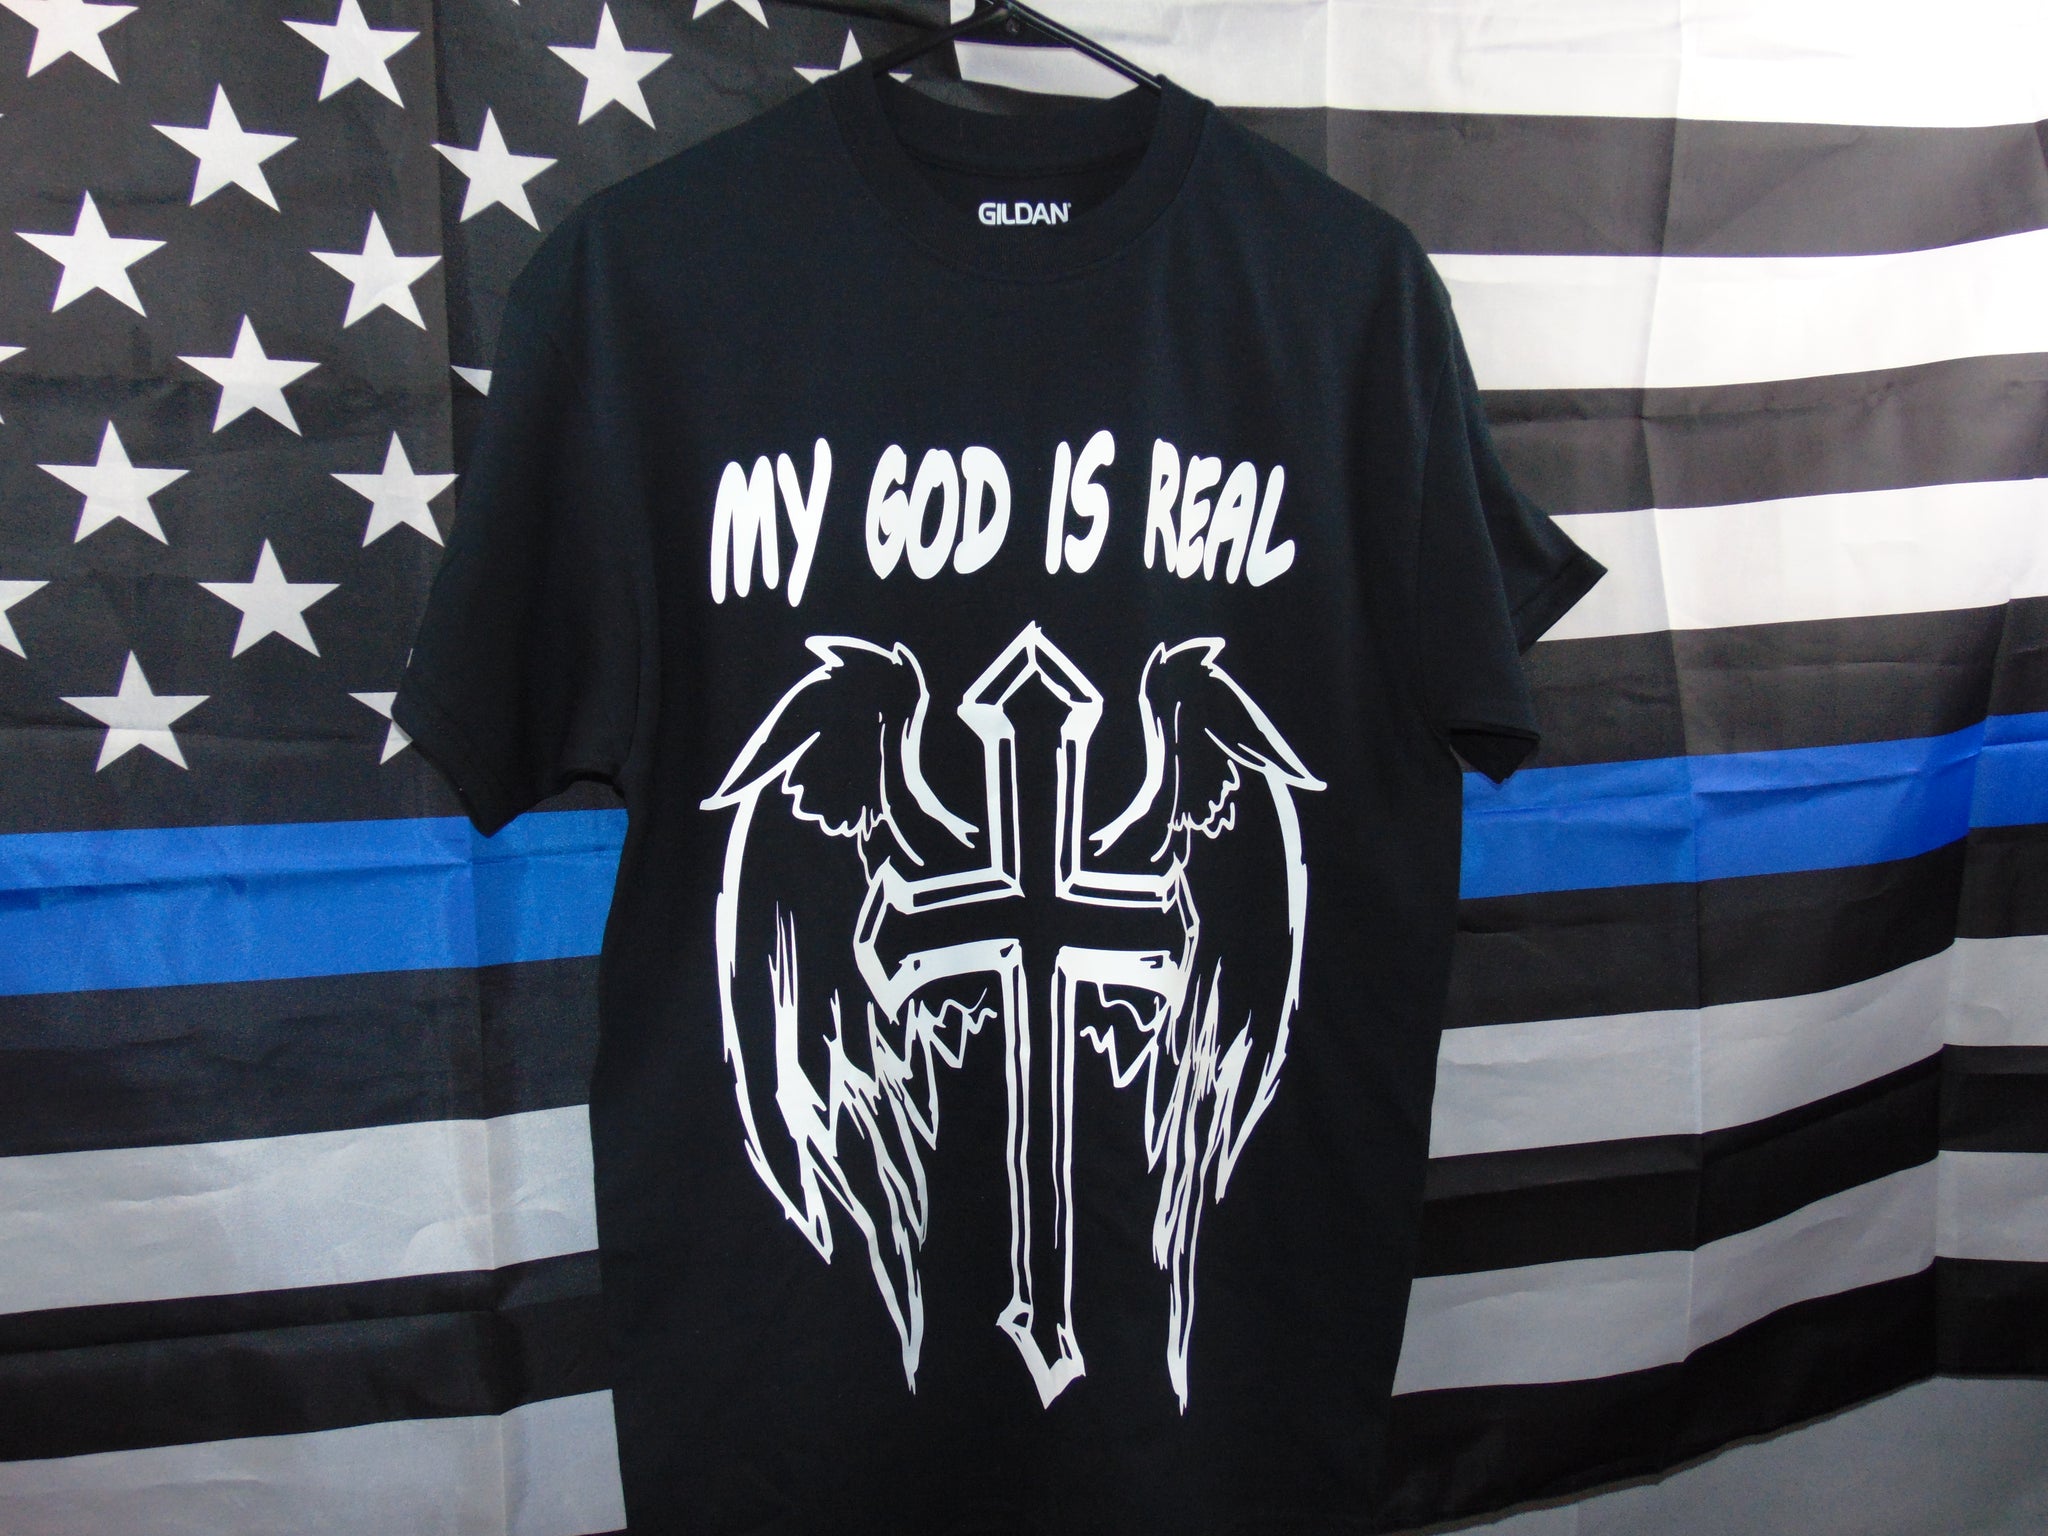 My God is real t-shirts